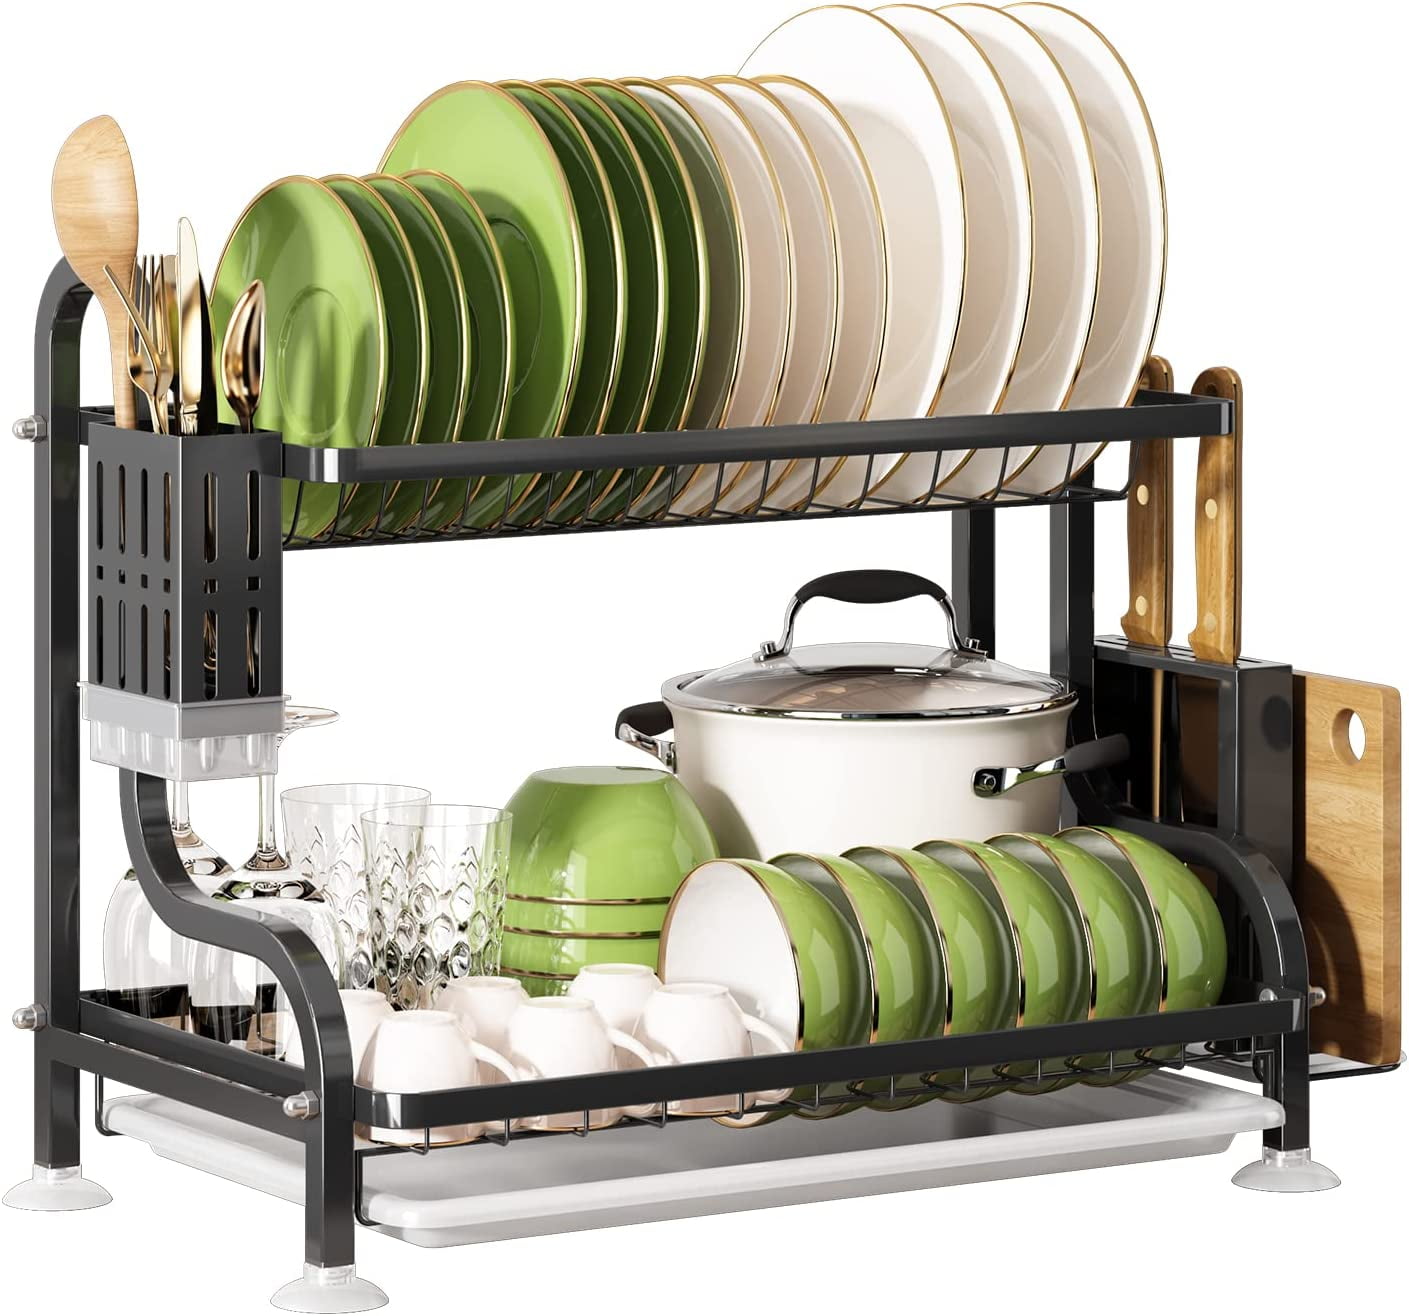 Happnear 2 Tier Dish Drying Rack with Drainboard, Kitchen Drying Rack with  Dish Mat/Towel, Large Dish Racks Drainers for Kitchen Counter, Dish